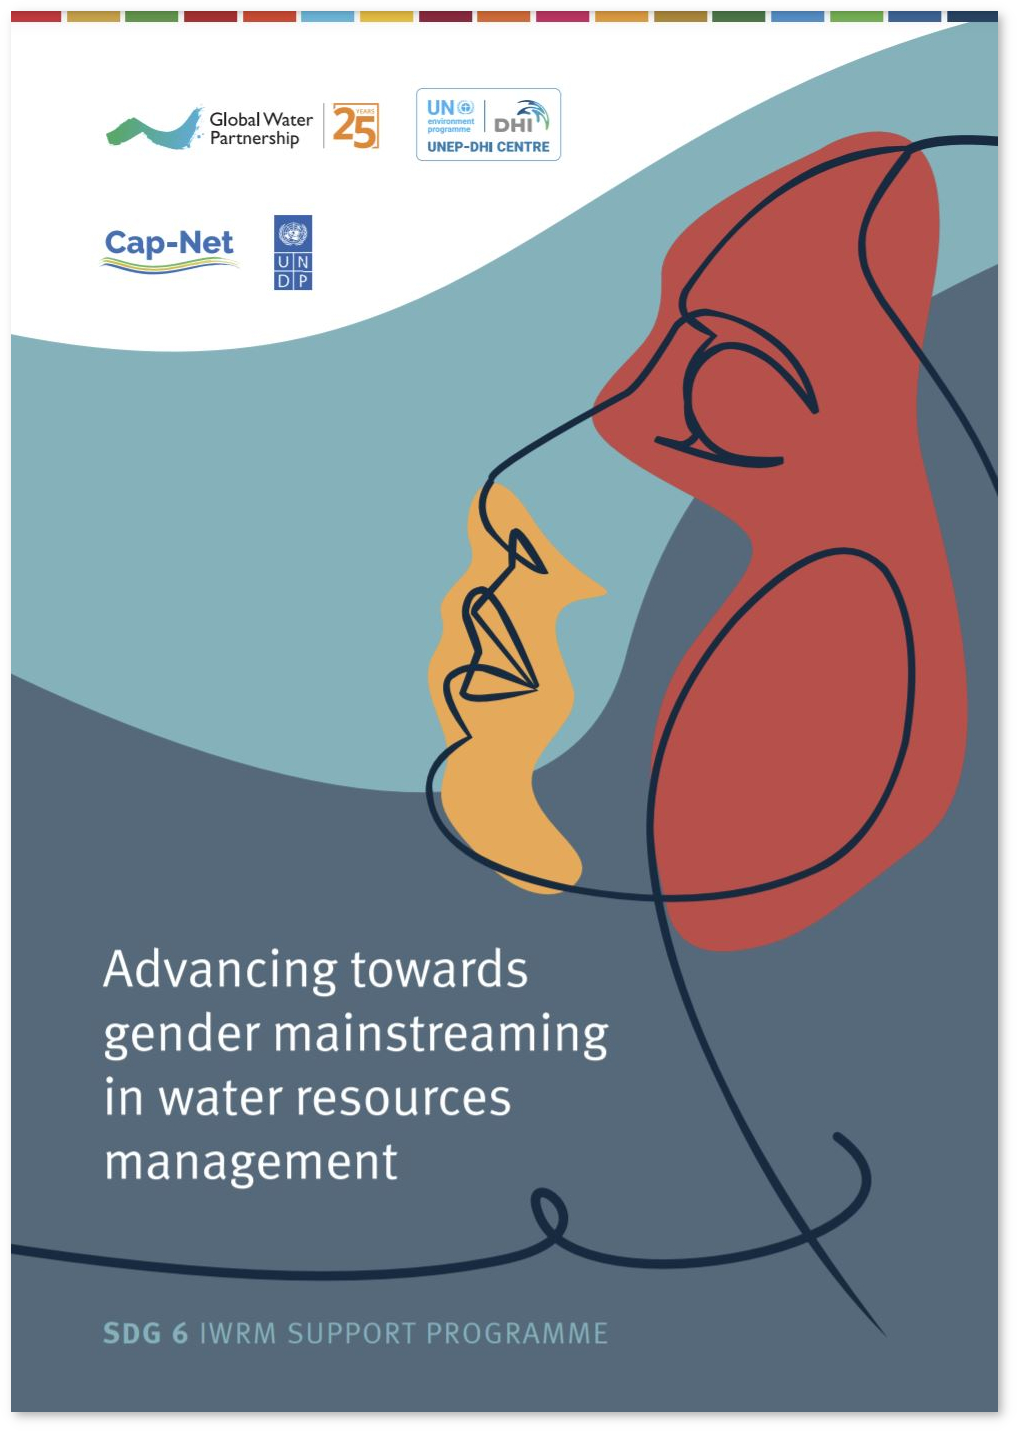 Advancing towards gender mainstreaming in water resources management